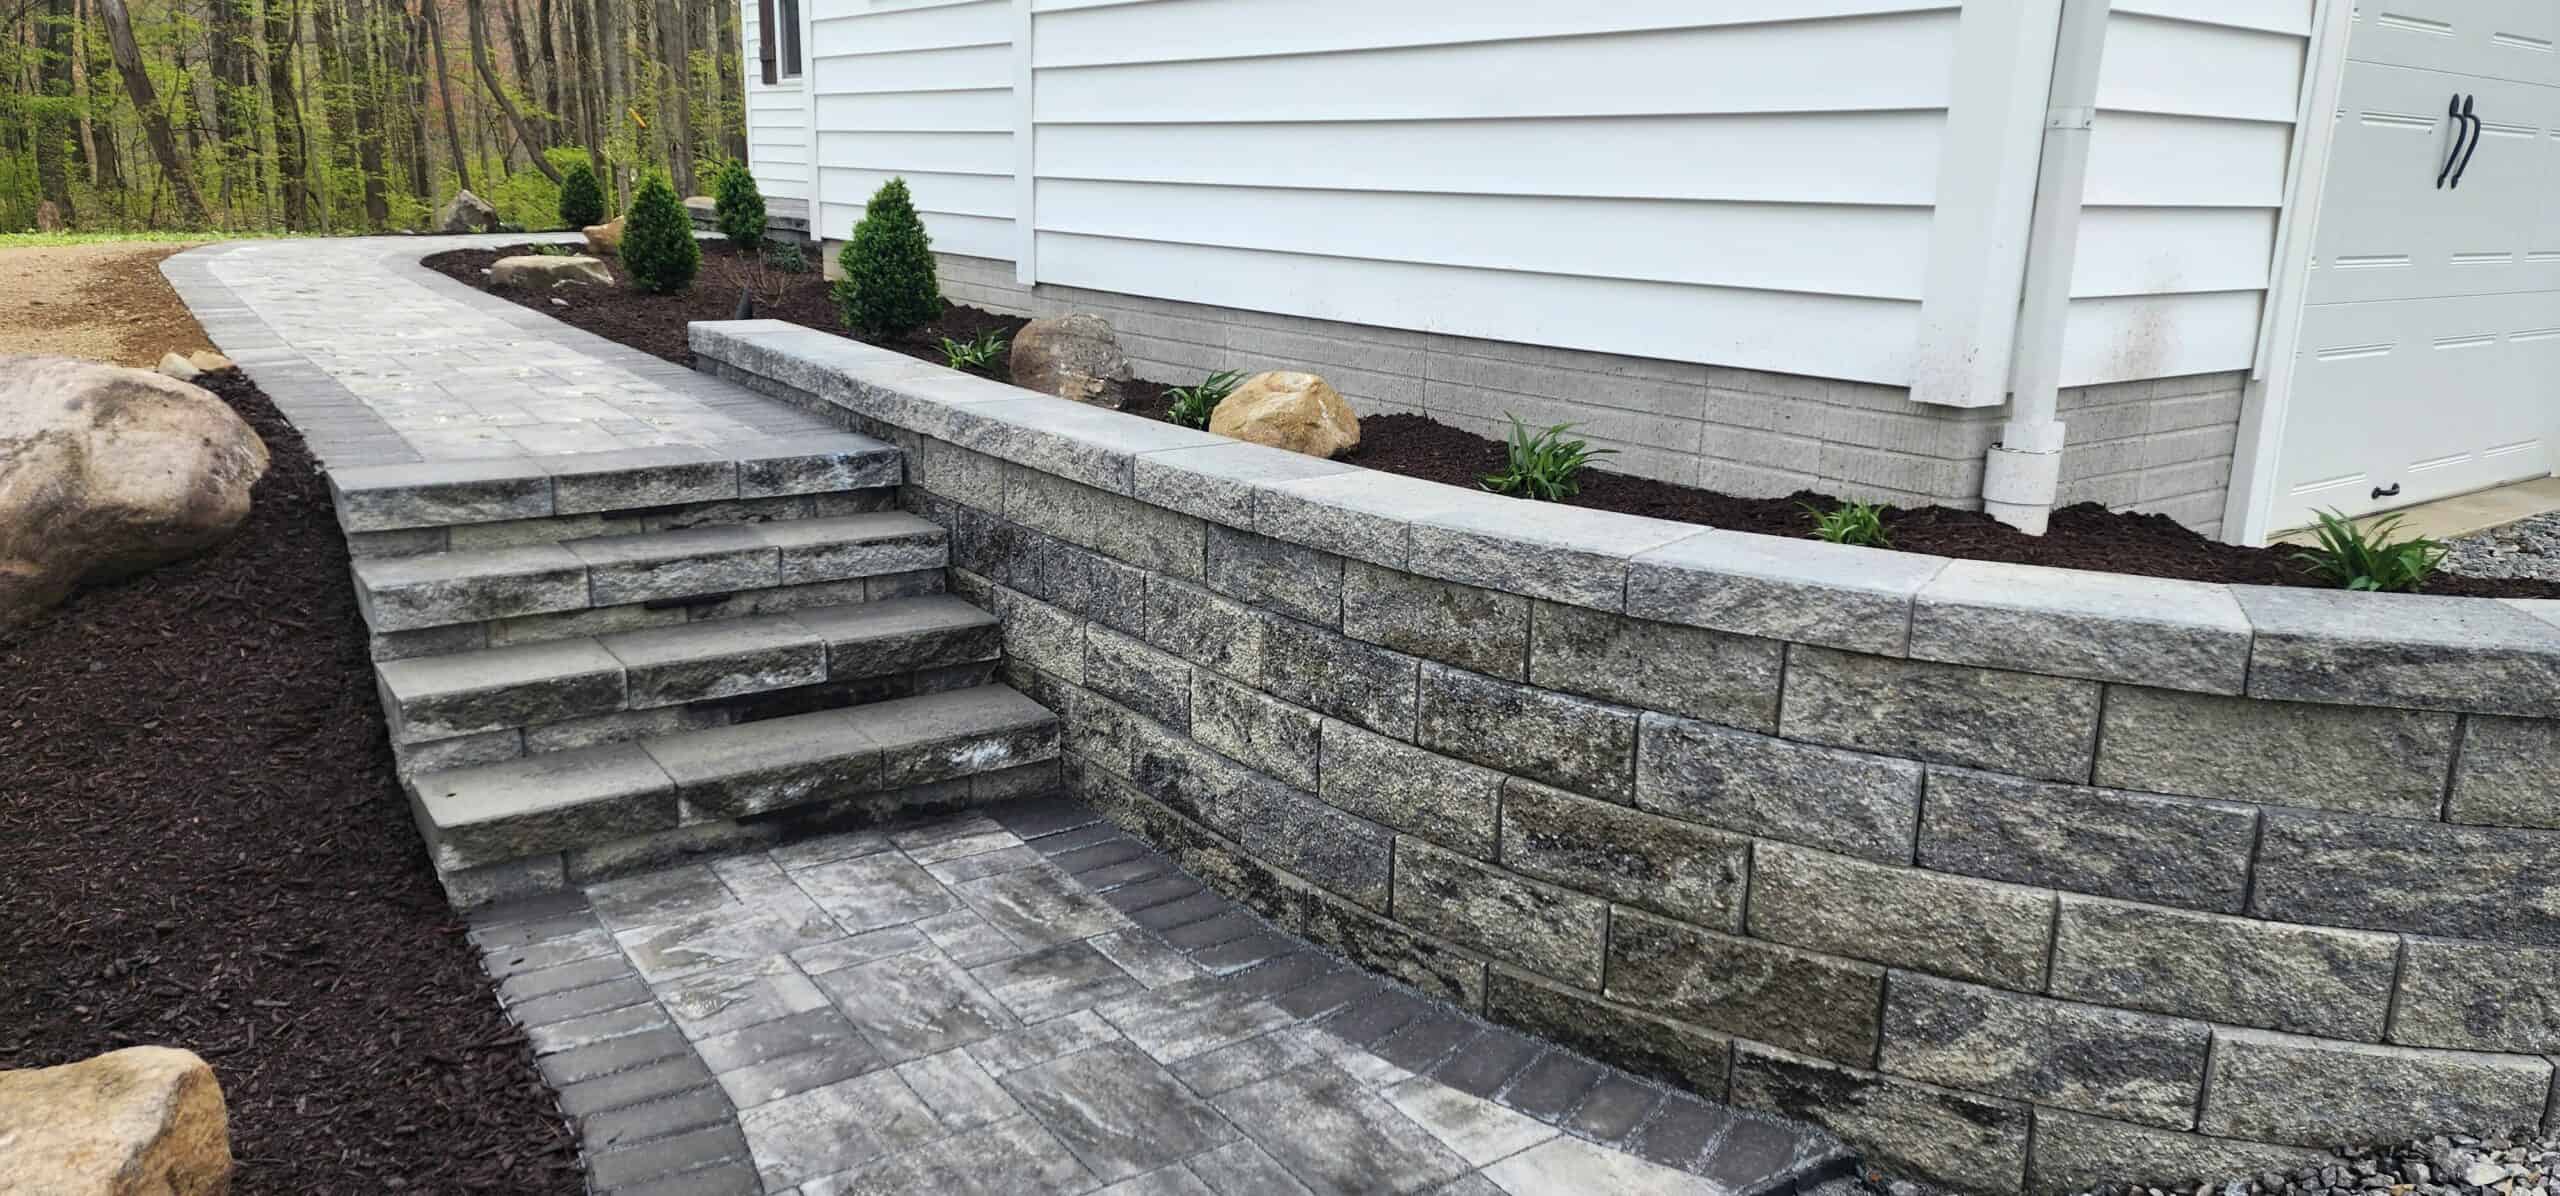 Prepare for Pennsylvania’s frigid winter with durable hardscaping and safe outdoor steps